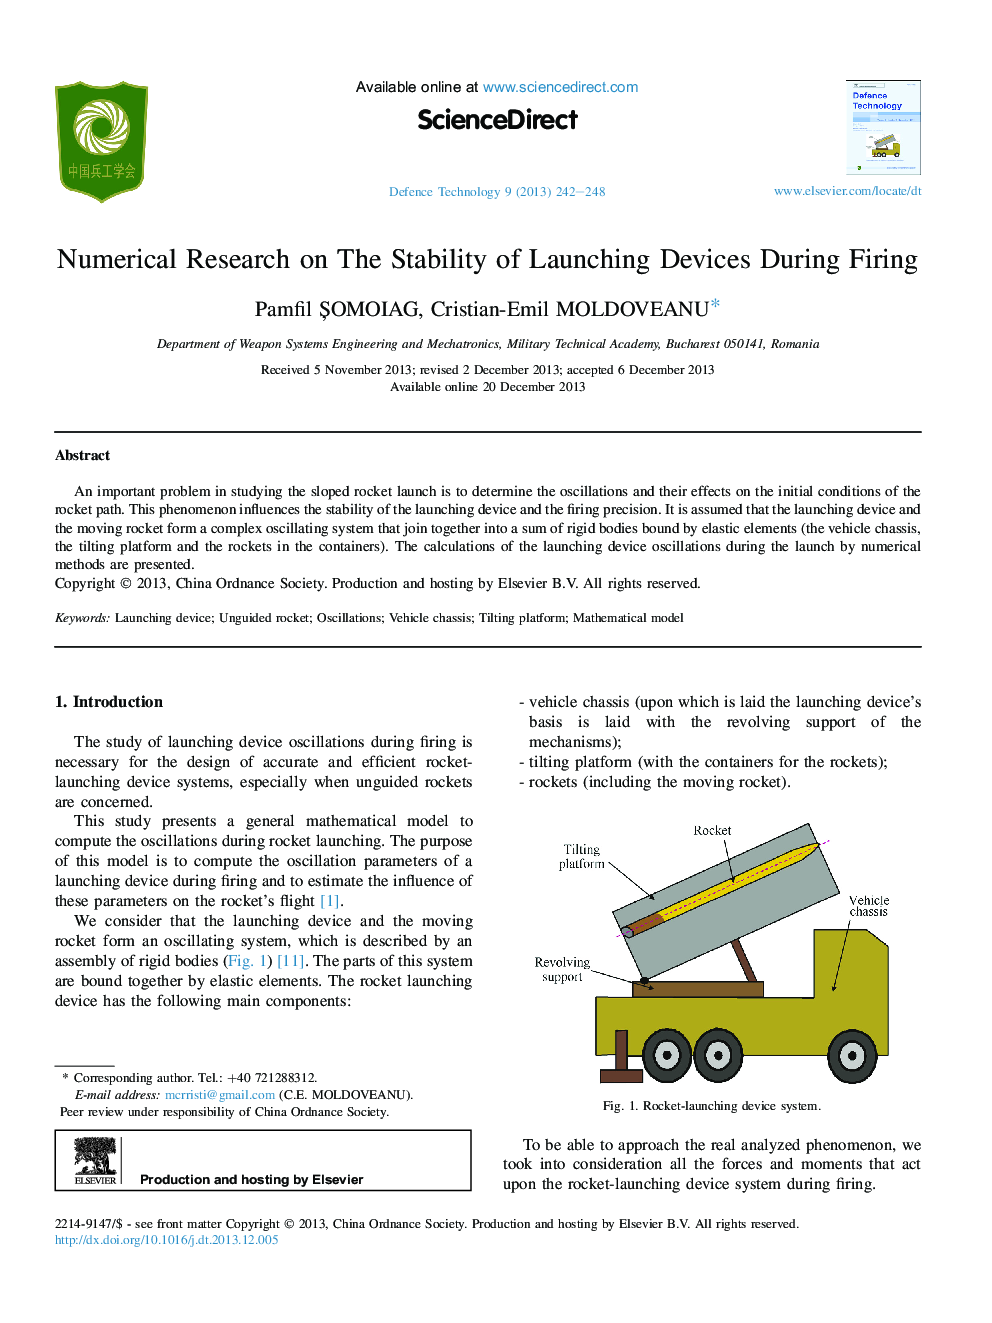 Numerical Research on The Stability of Launching Devices During Firing 